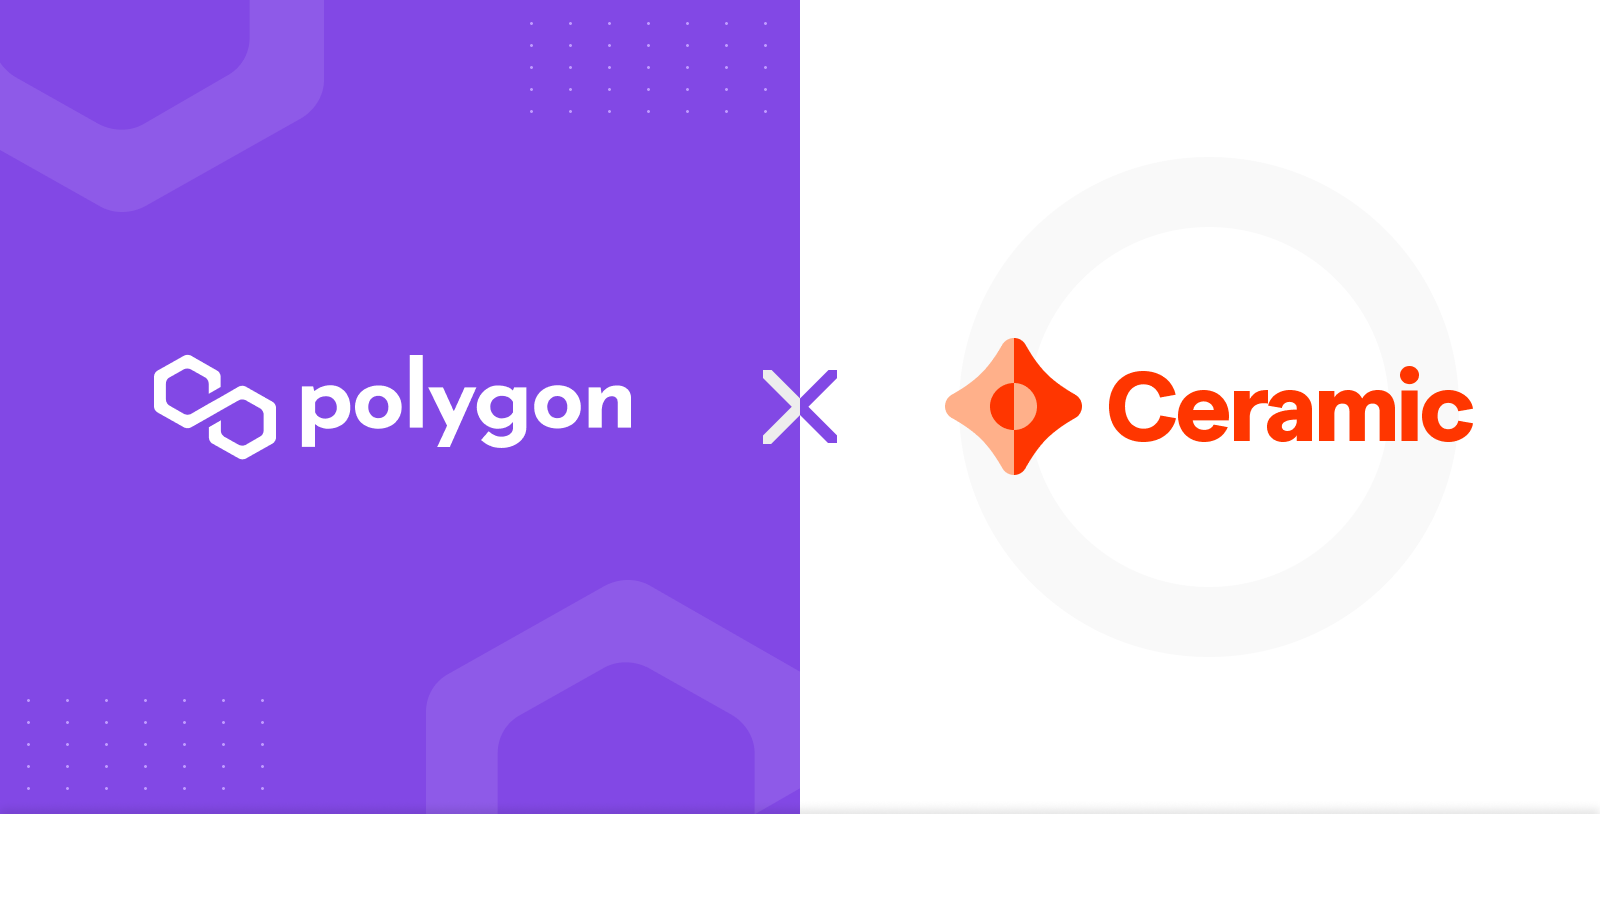 Polygon and Ceramic let developers build complete Web3 apps with shared authentication.